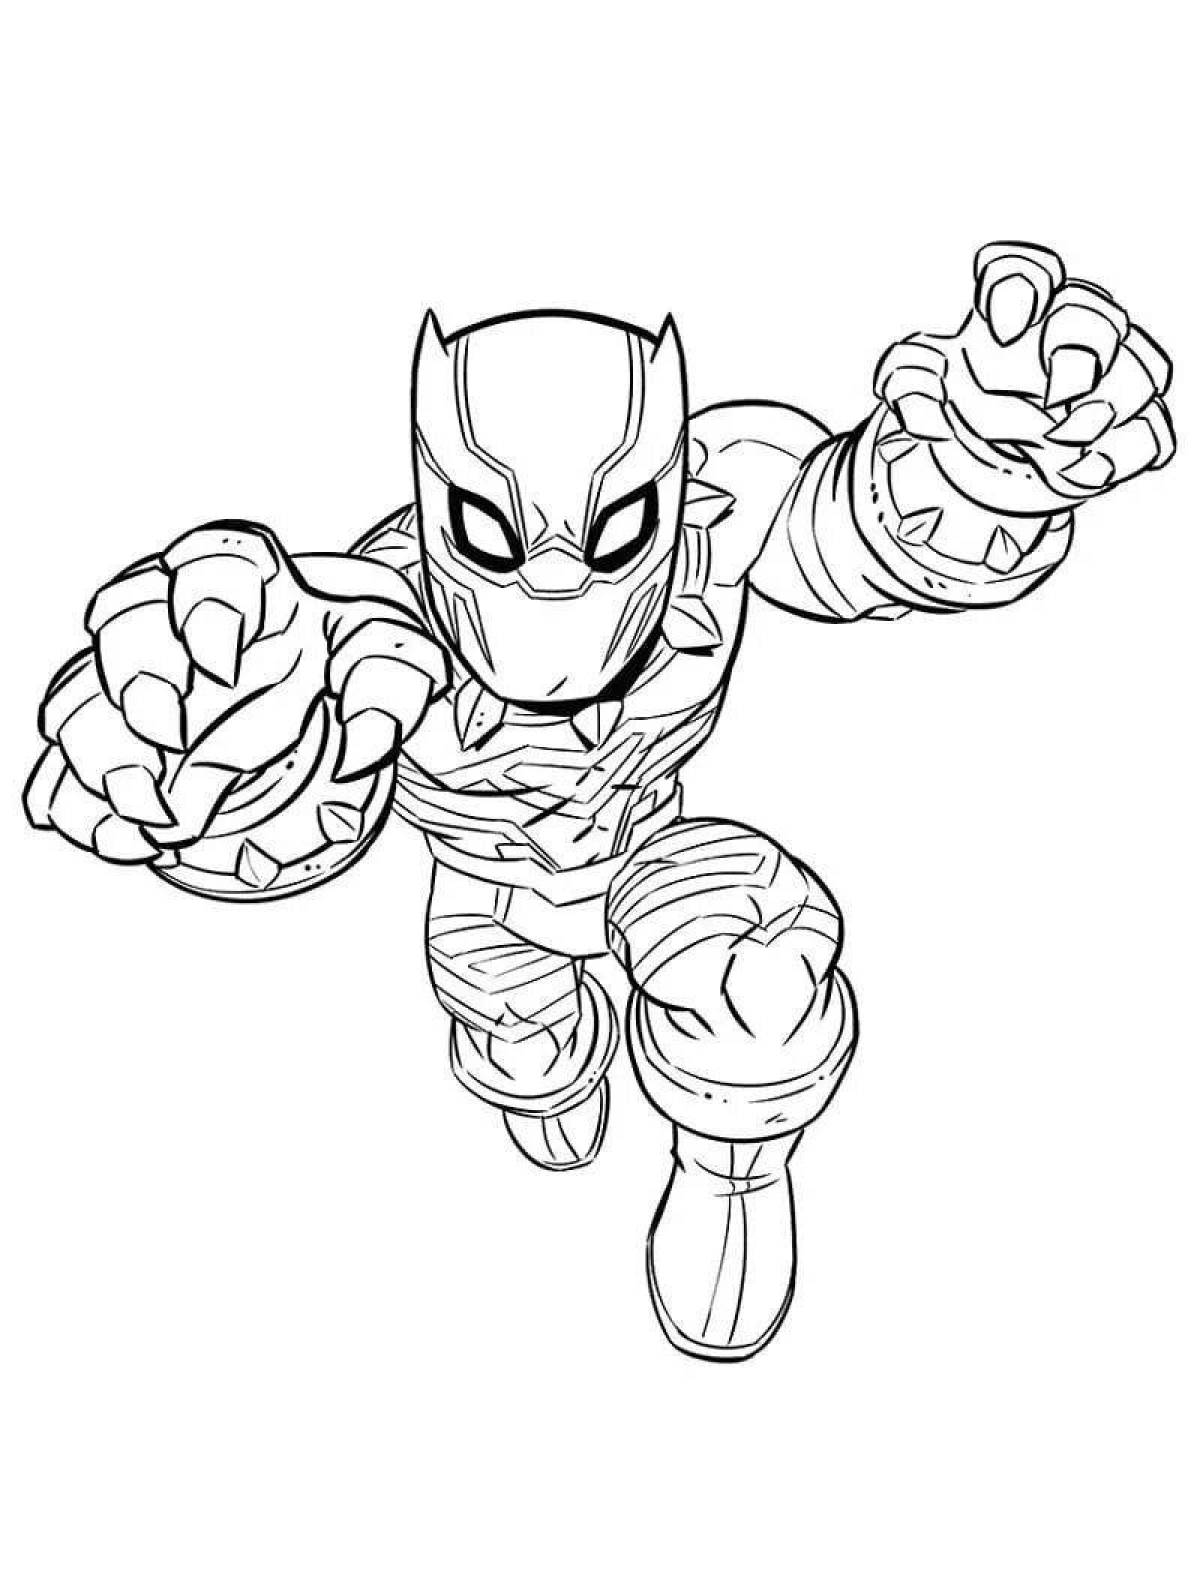 Marvel coloring book for kids